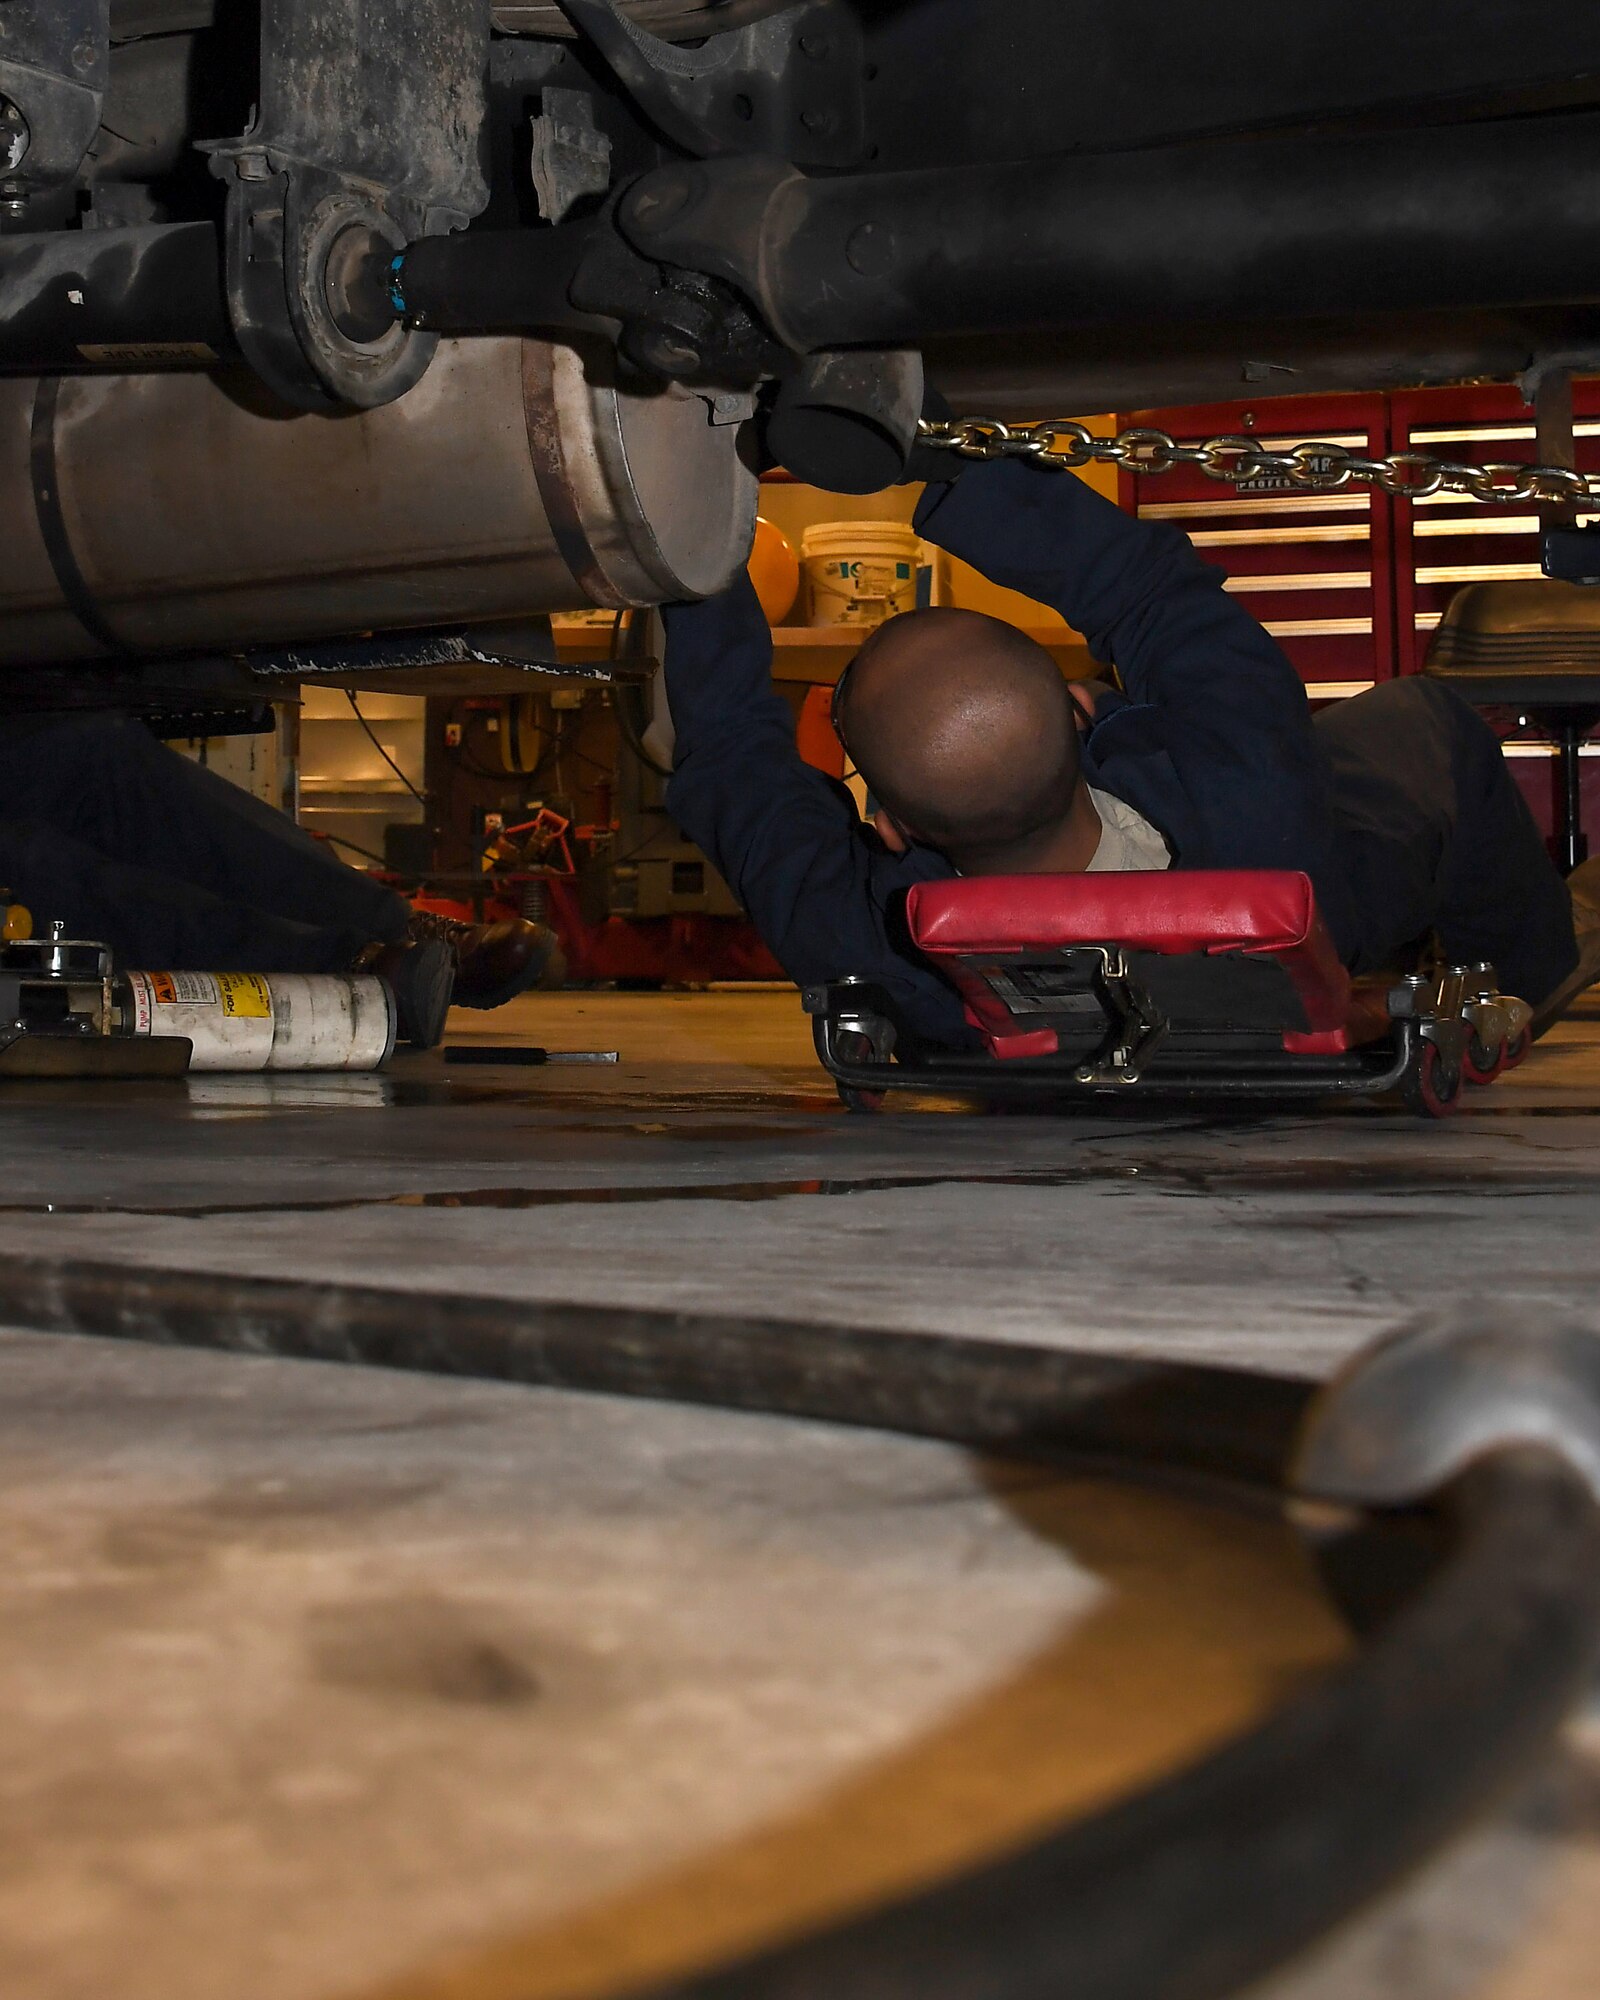 Airman 1st Class Michael Ocaya, 319th Logistics Readiness Squadron fire truck maintenance apprentice, assists with removing a damaged pump from an aerial lift truck August 28, 2018, on Grand Forks Air Force Base, North Dakota. Vehicle maintainers like Ocaya attend technical training of varying lengths depending on which vehicle they are trained on. In Ocaya’s case, as a fire truck maintainer, he was in school for about five months before graduating and being stationed at Grand Forks AFB. (U.S. Air Force photo by Airman 1st Class Elora J. Martinez)